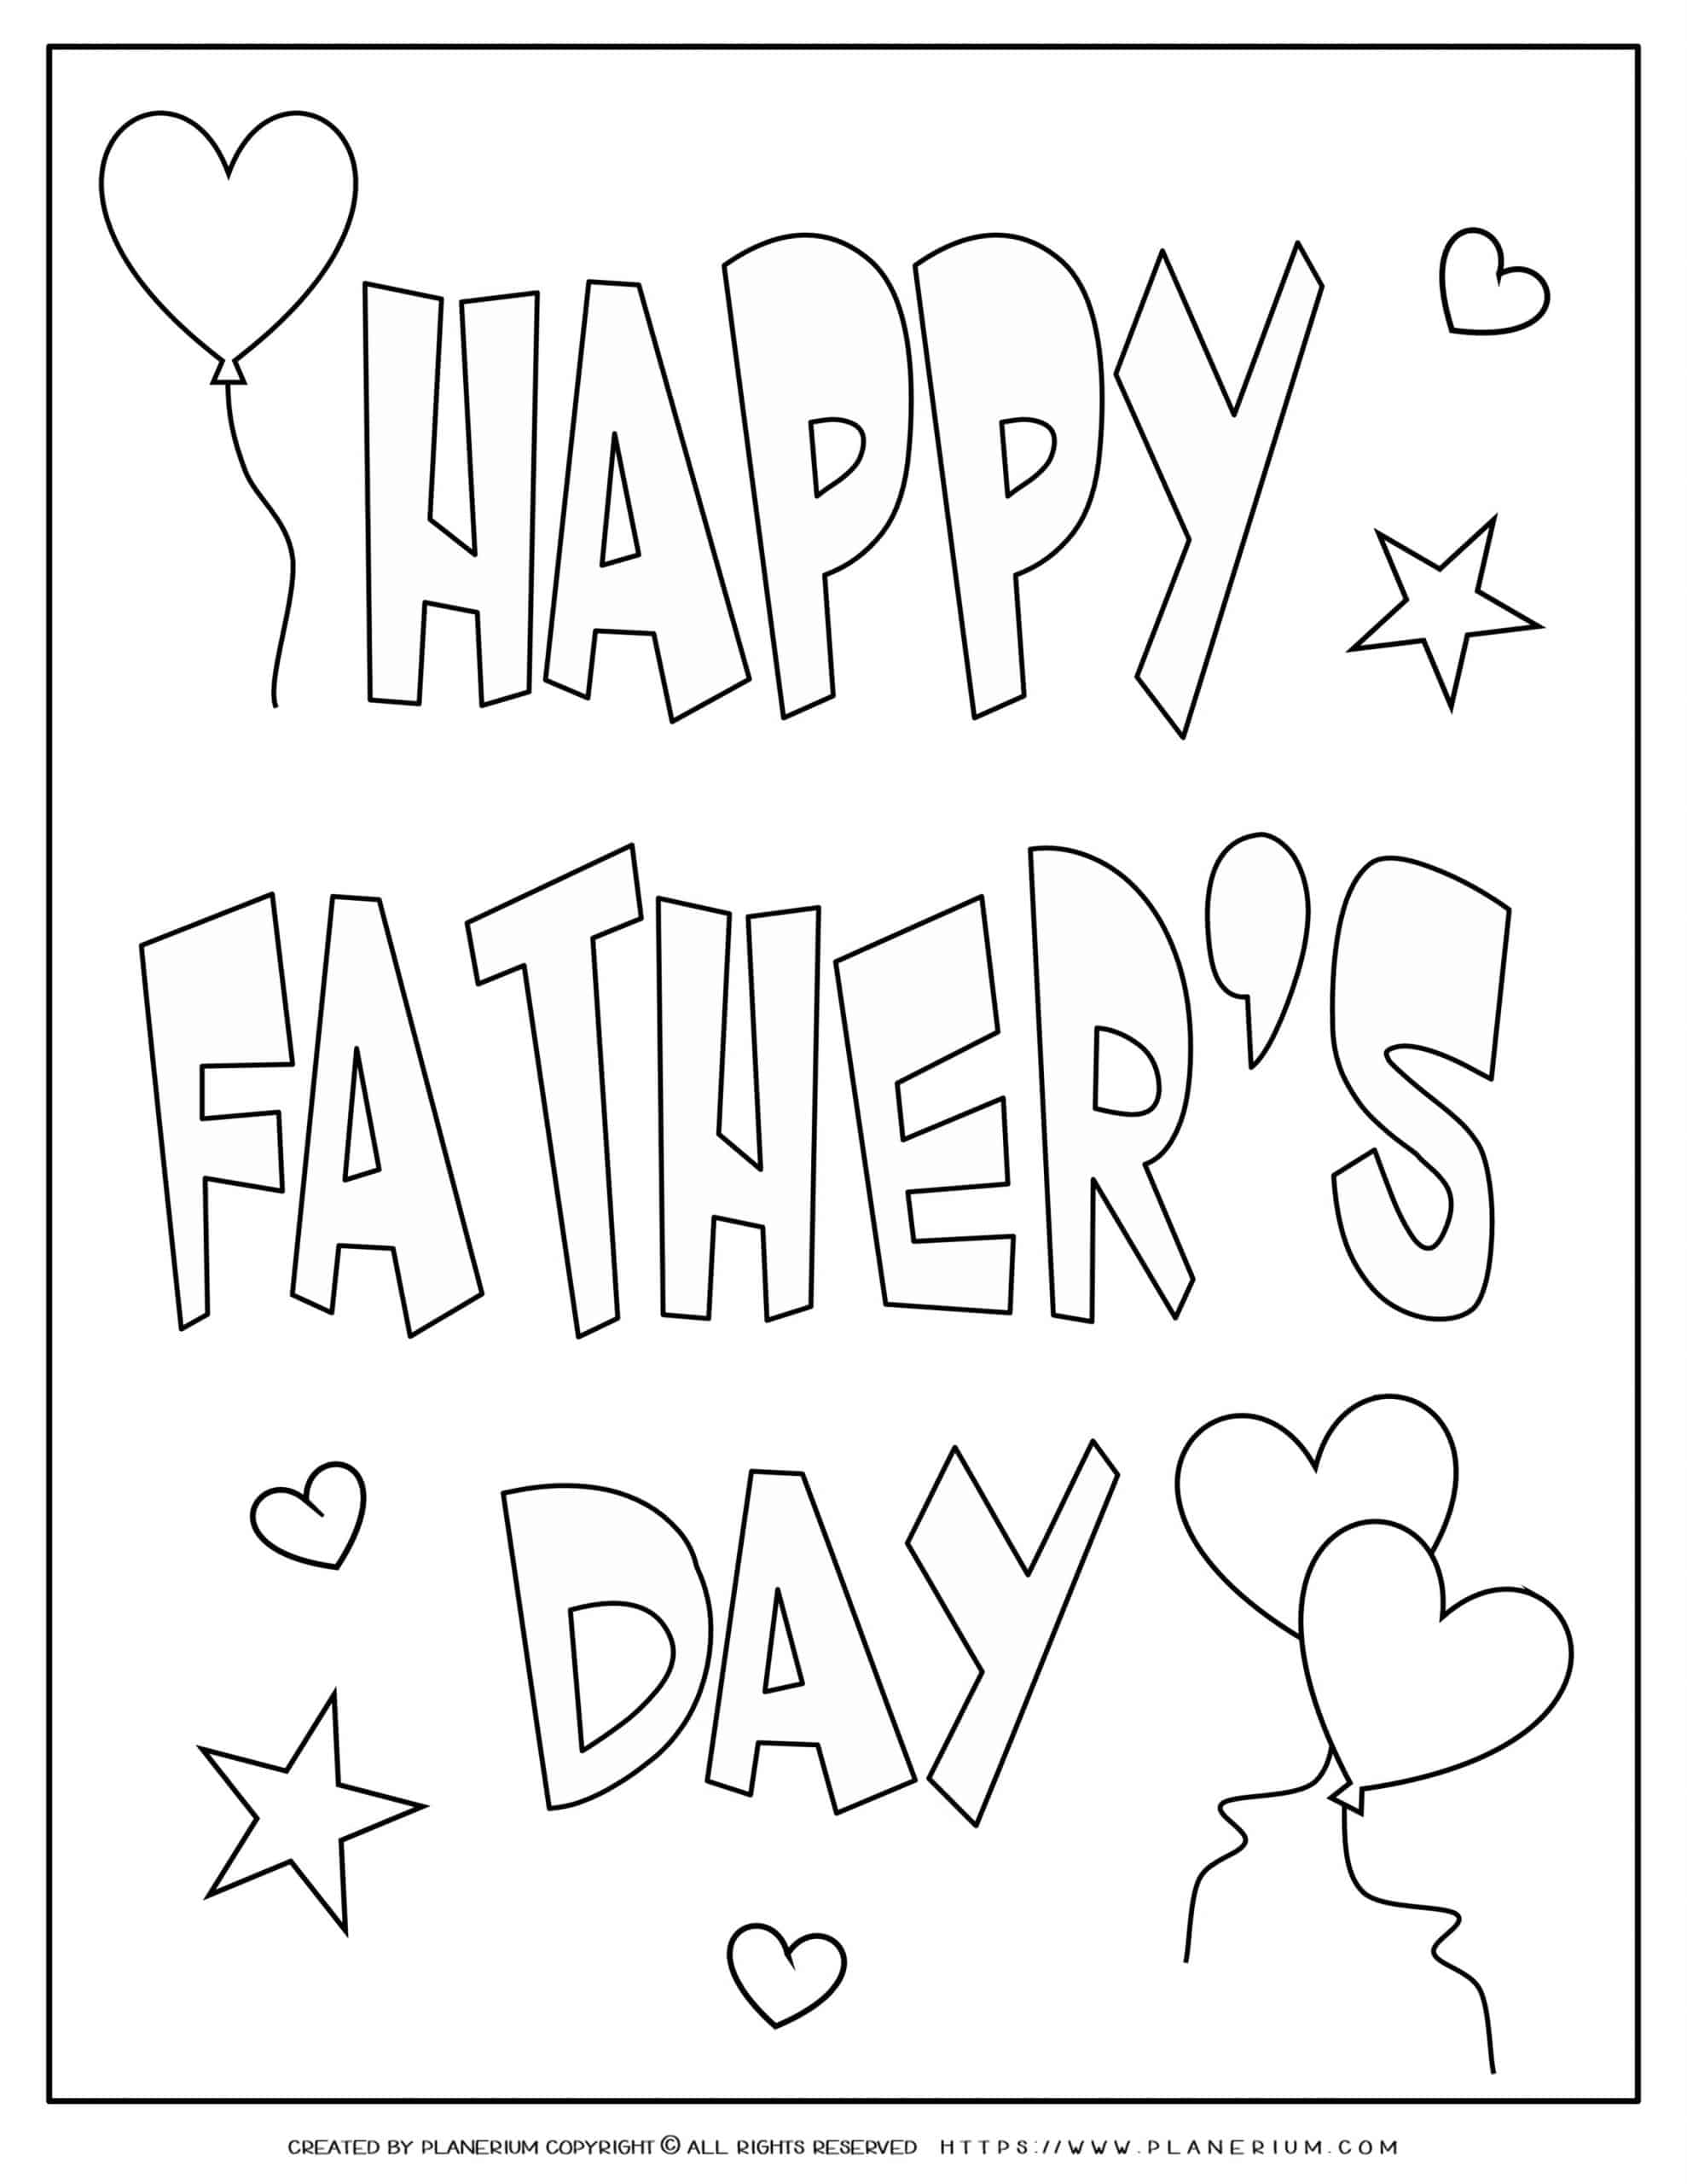 father-s-day-coloring-page-happy-father-s-day-planerium